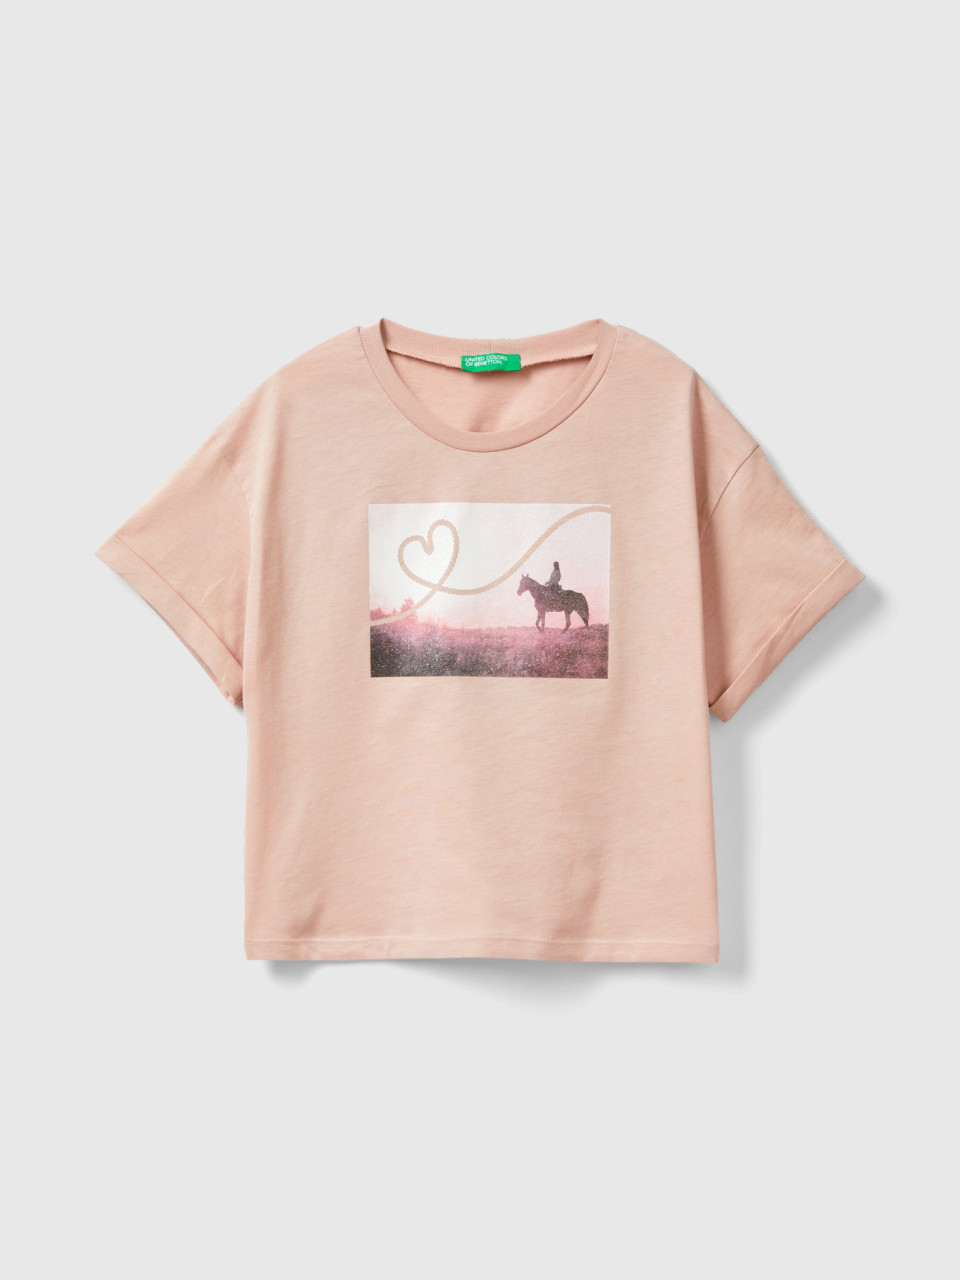 Benetton, T-shirt With Photographic Horse Print, Soft Pink, Kids